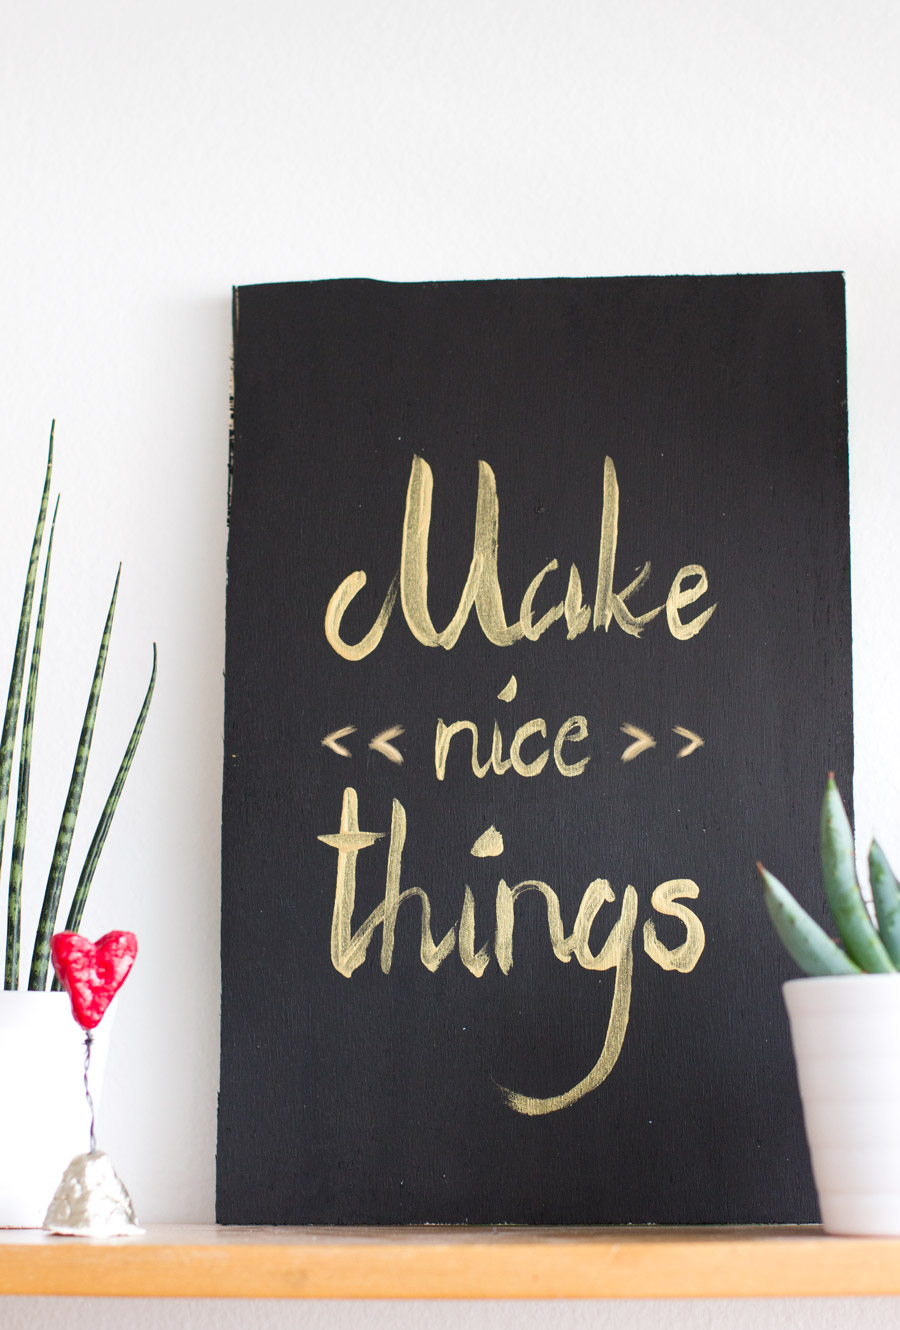 "Make nice things" is a good reminder for everyday. Make yourself your own inspirational plaque from scratch.